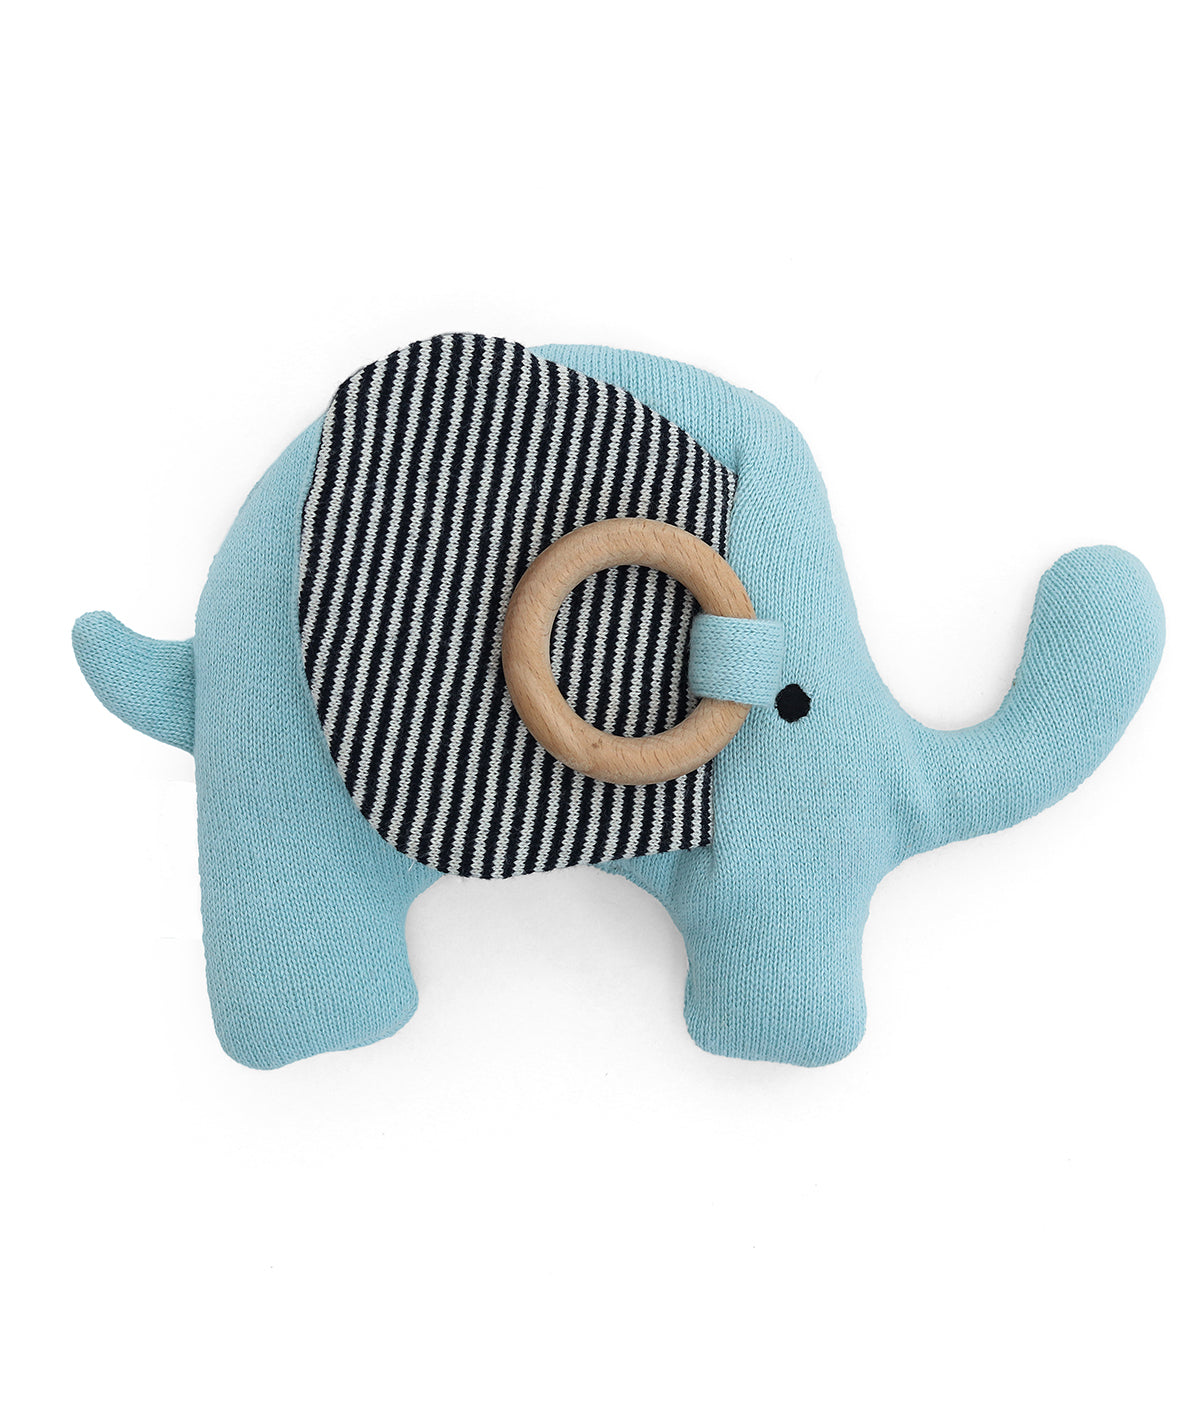 Crinkle Me Elephant Soother Toy Cotton Knitted Stuffed Soft Toy (Baby Pink & Natural, Navy)